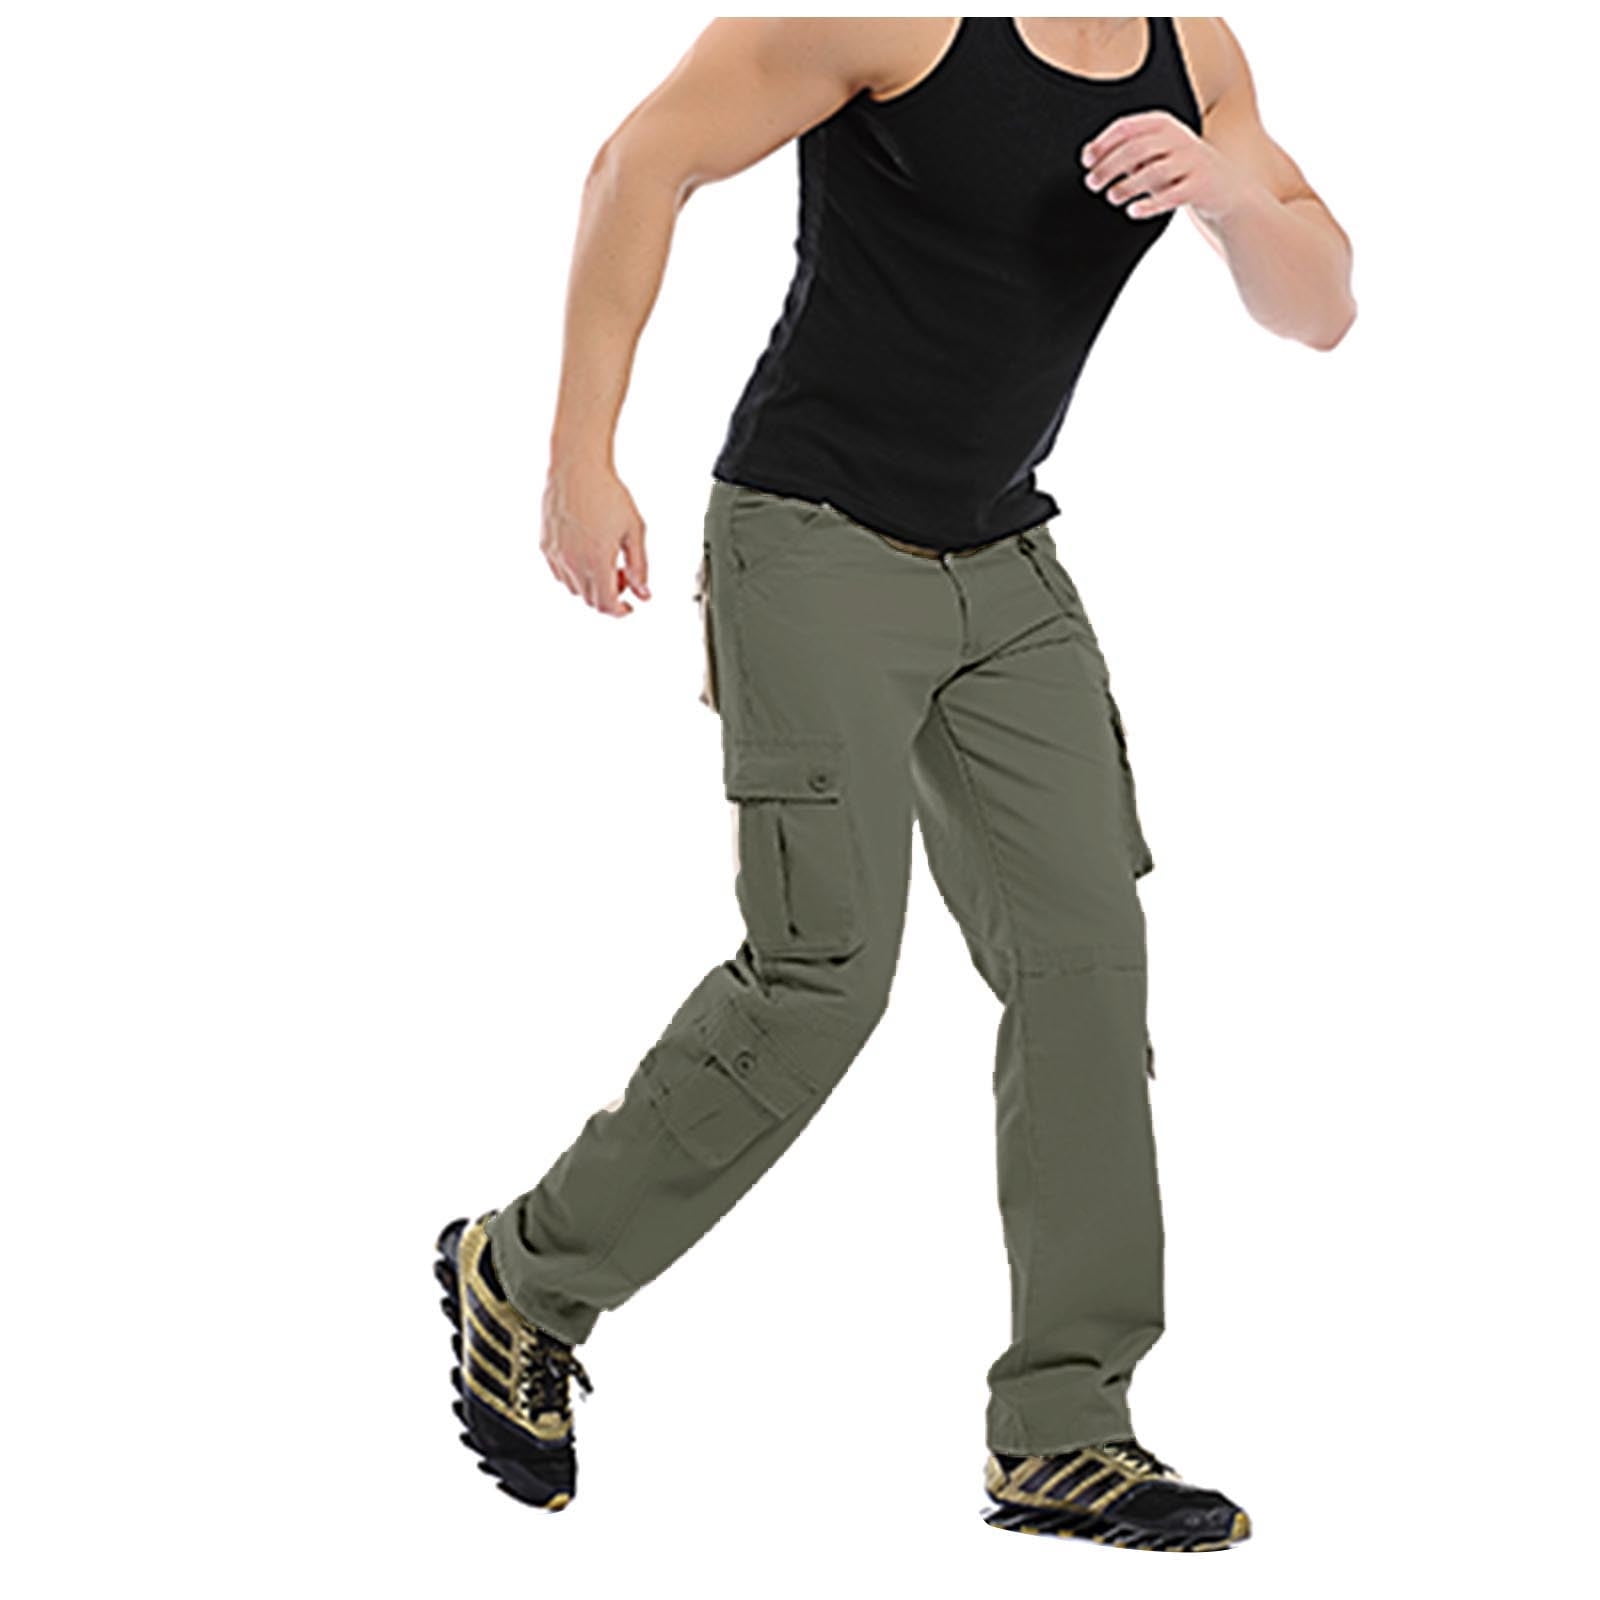 cllios Clearance Under $5 Mens Cargo Pants Plus Size Multi Pockets Pants  Outdoor Military Pants Comfortable Hiking Cargo Pants 